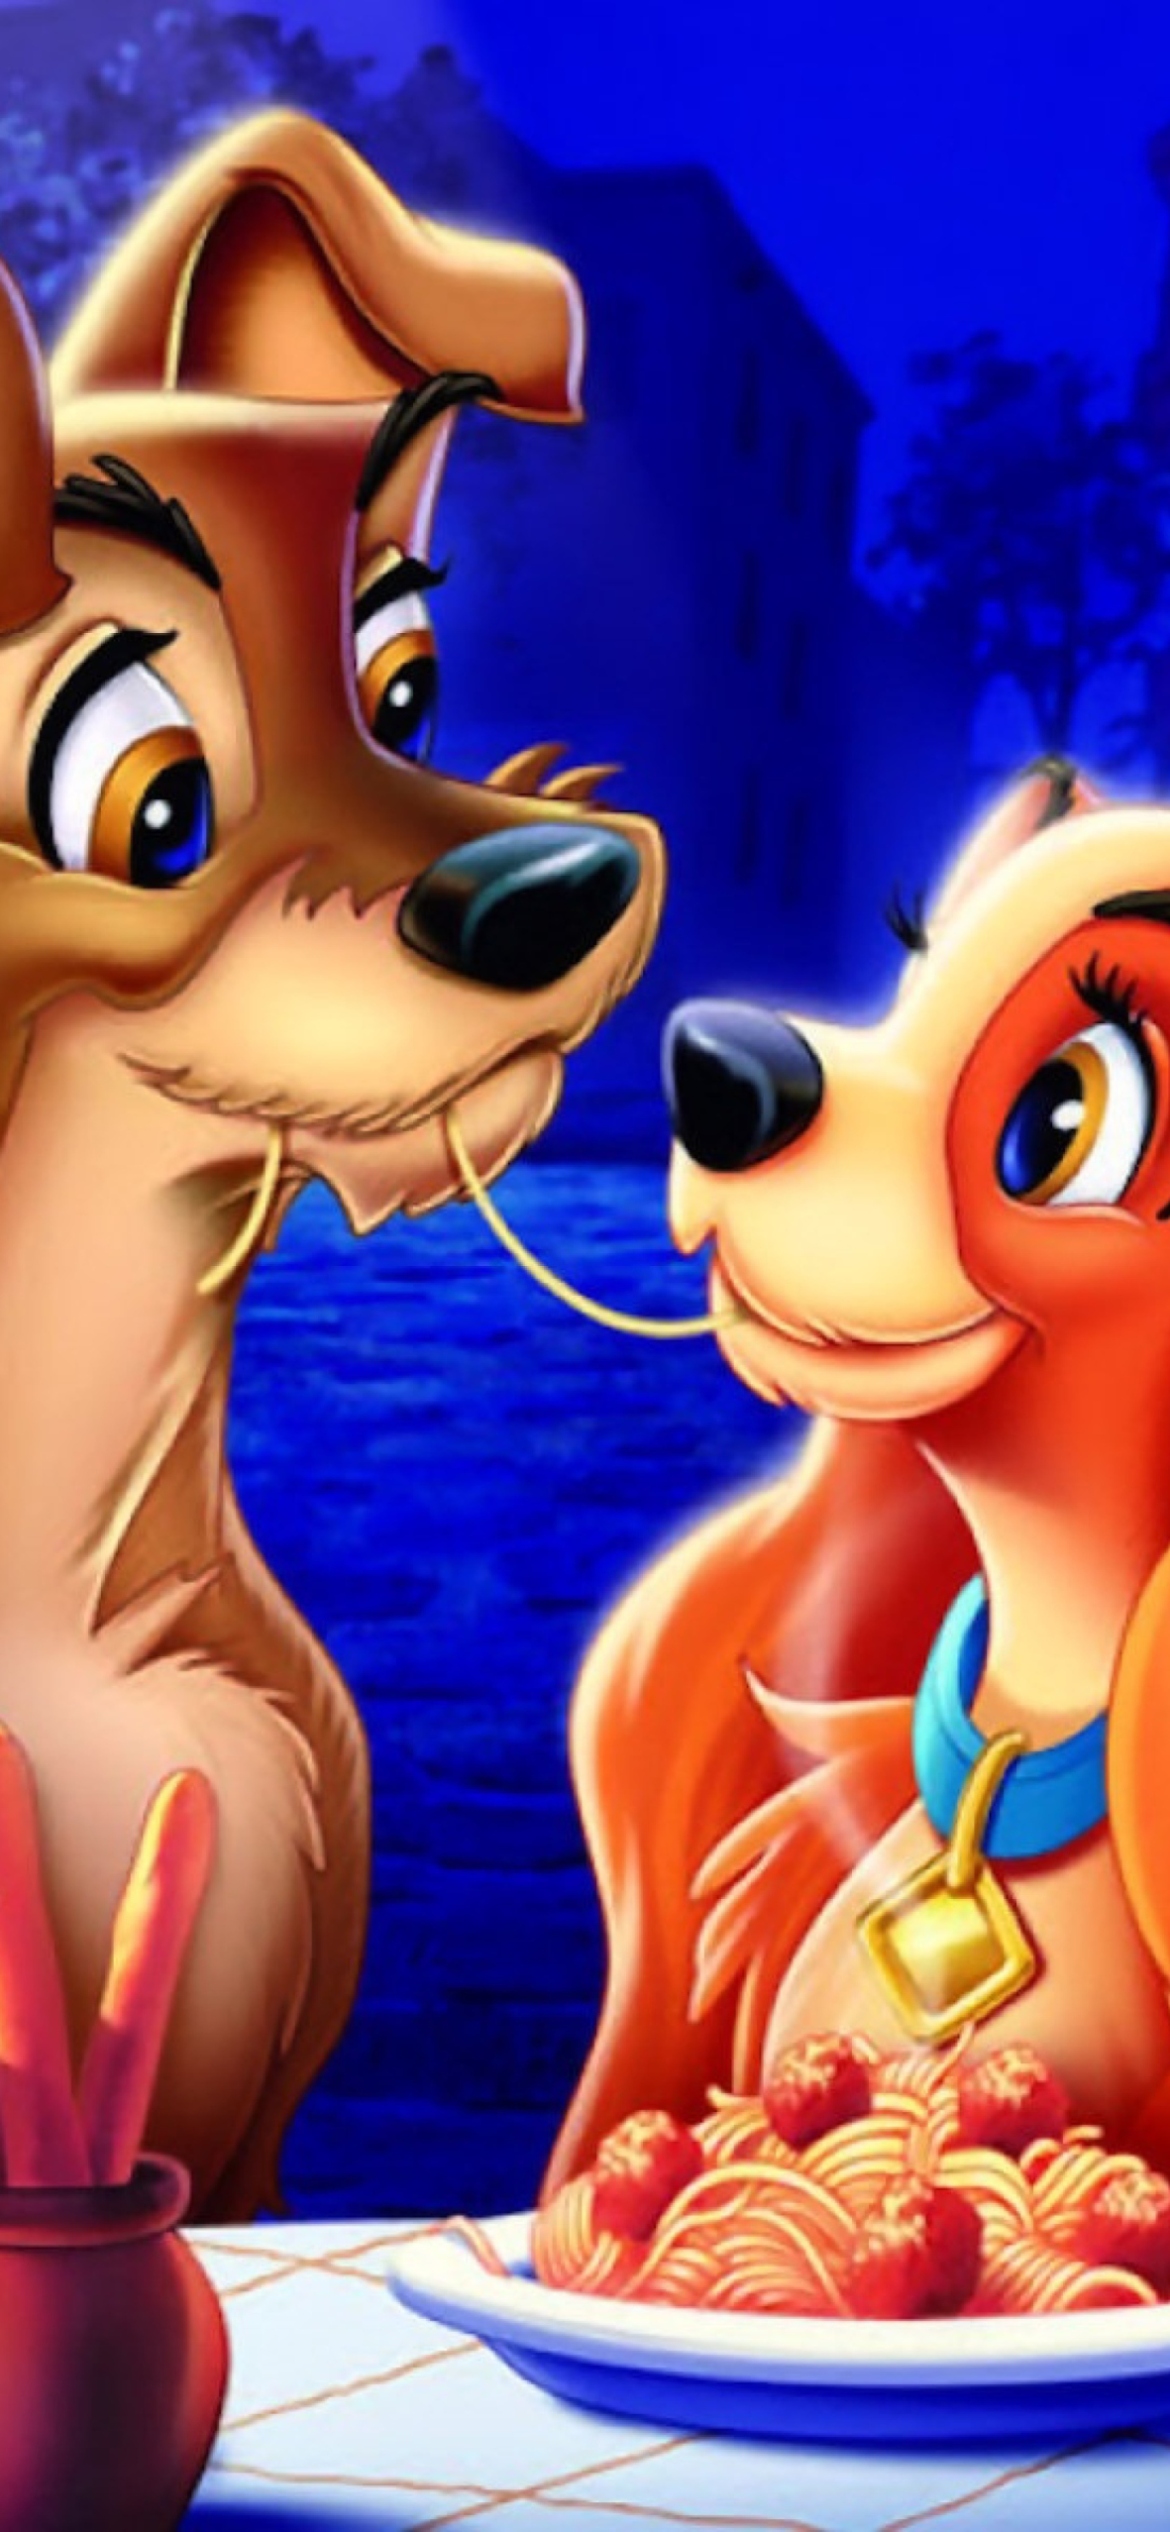 Lady And The Tramp wallpaper 1170x2532